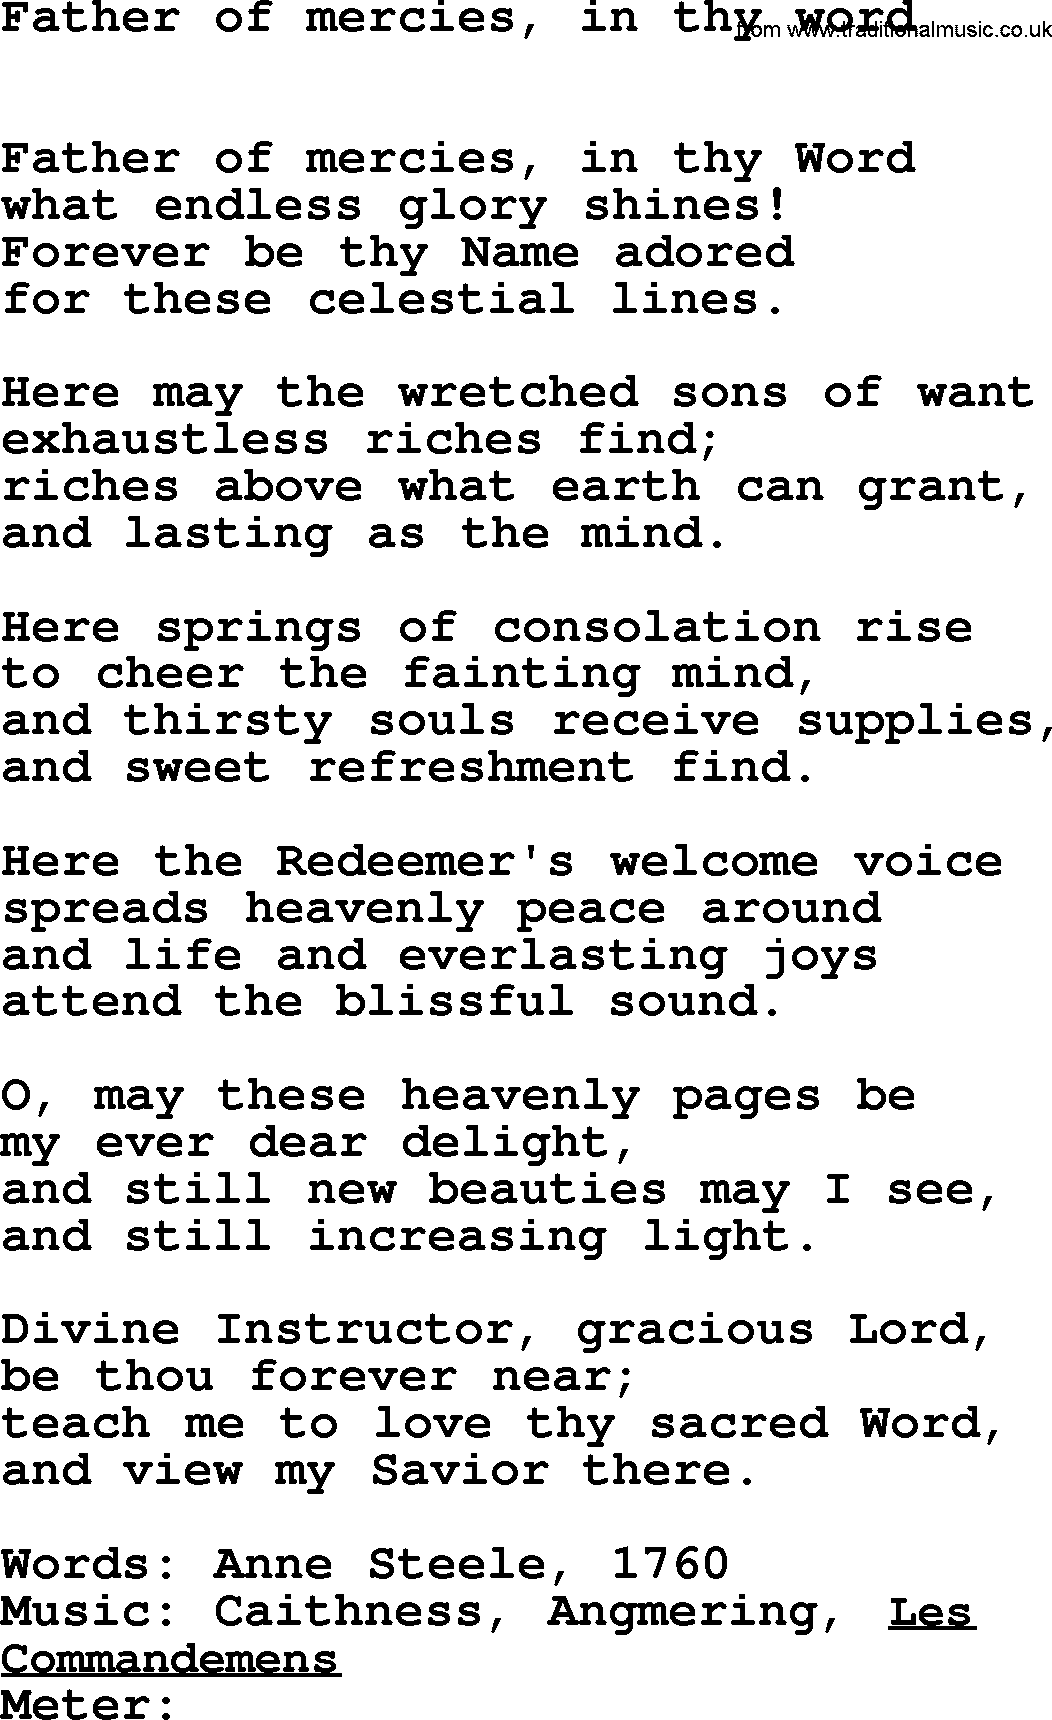 Book of Common Praise Hymn: Father Of Mercies, In Thy Word.txt lyrics with midi music